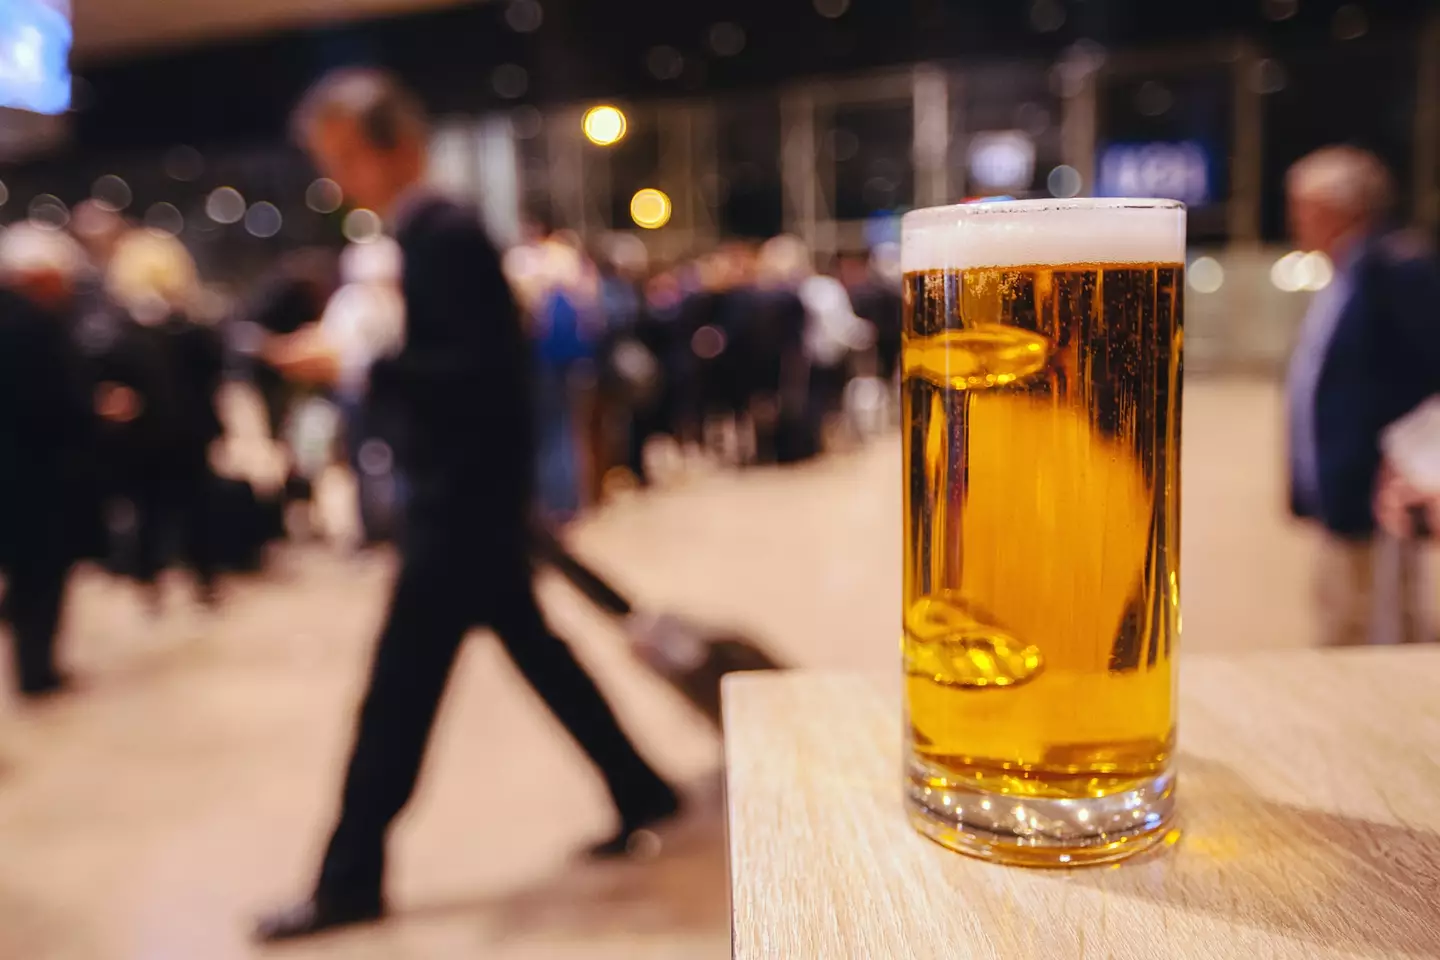 According to the expert, it might be best to cut airport pints out.